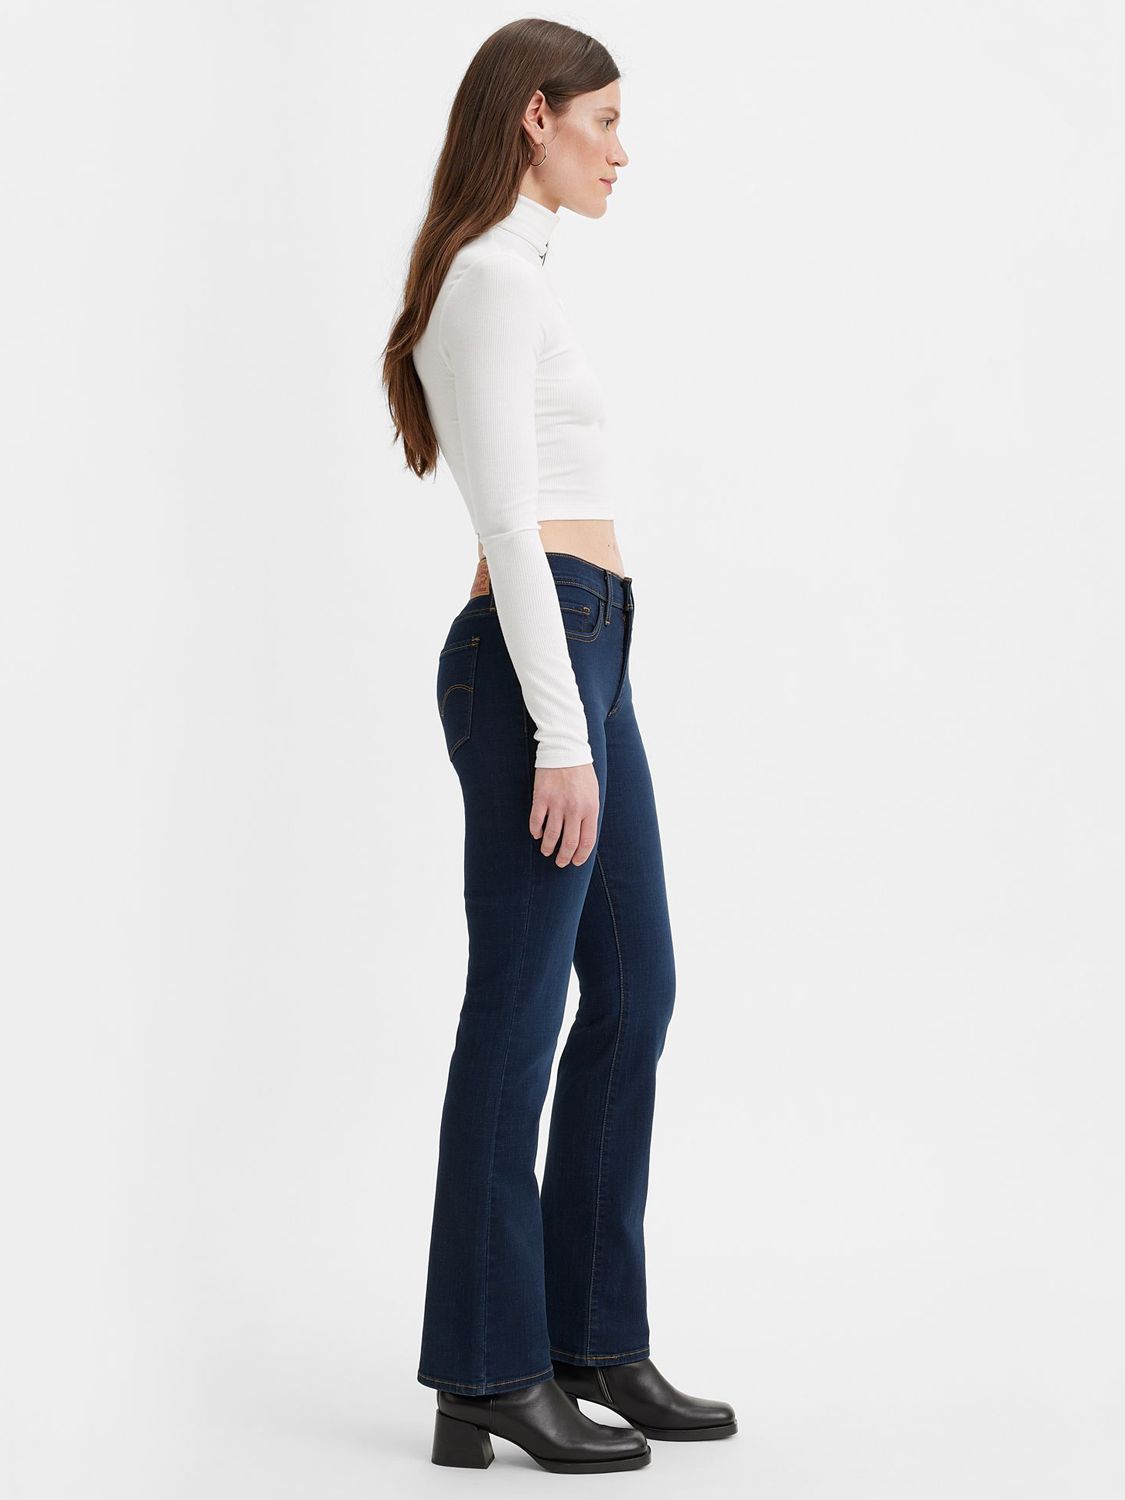 Levi's 315 Shaping Bootcut Jeans, Cobalt March at John Lewis & Partners